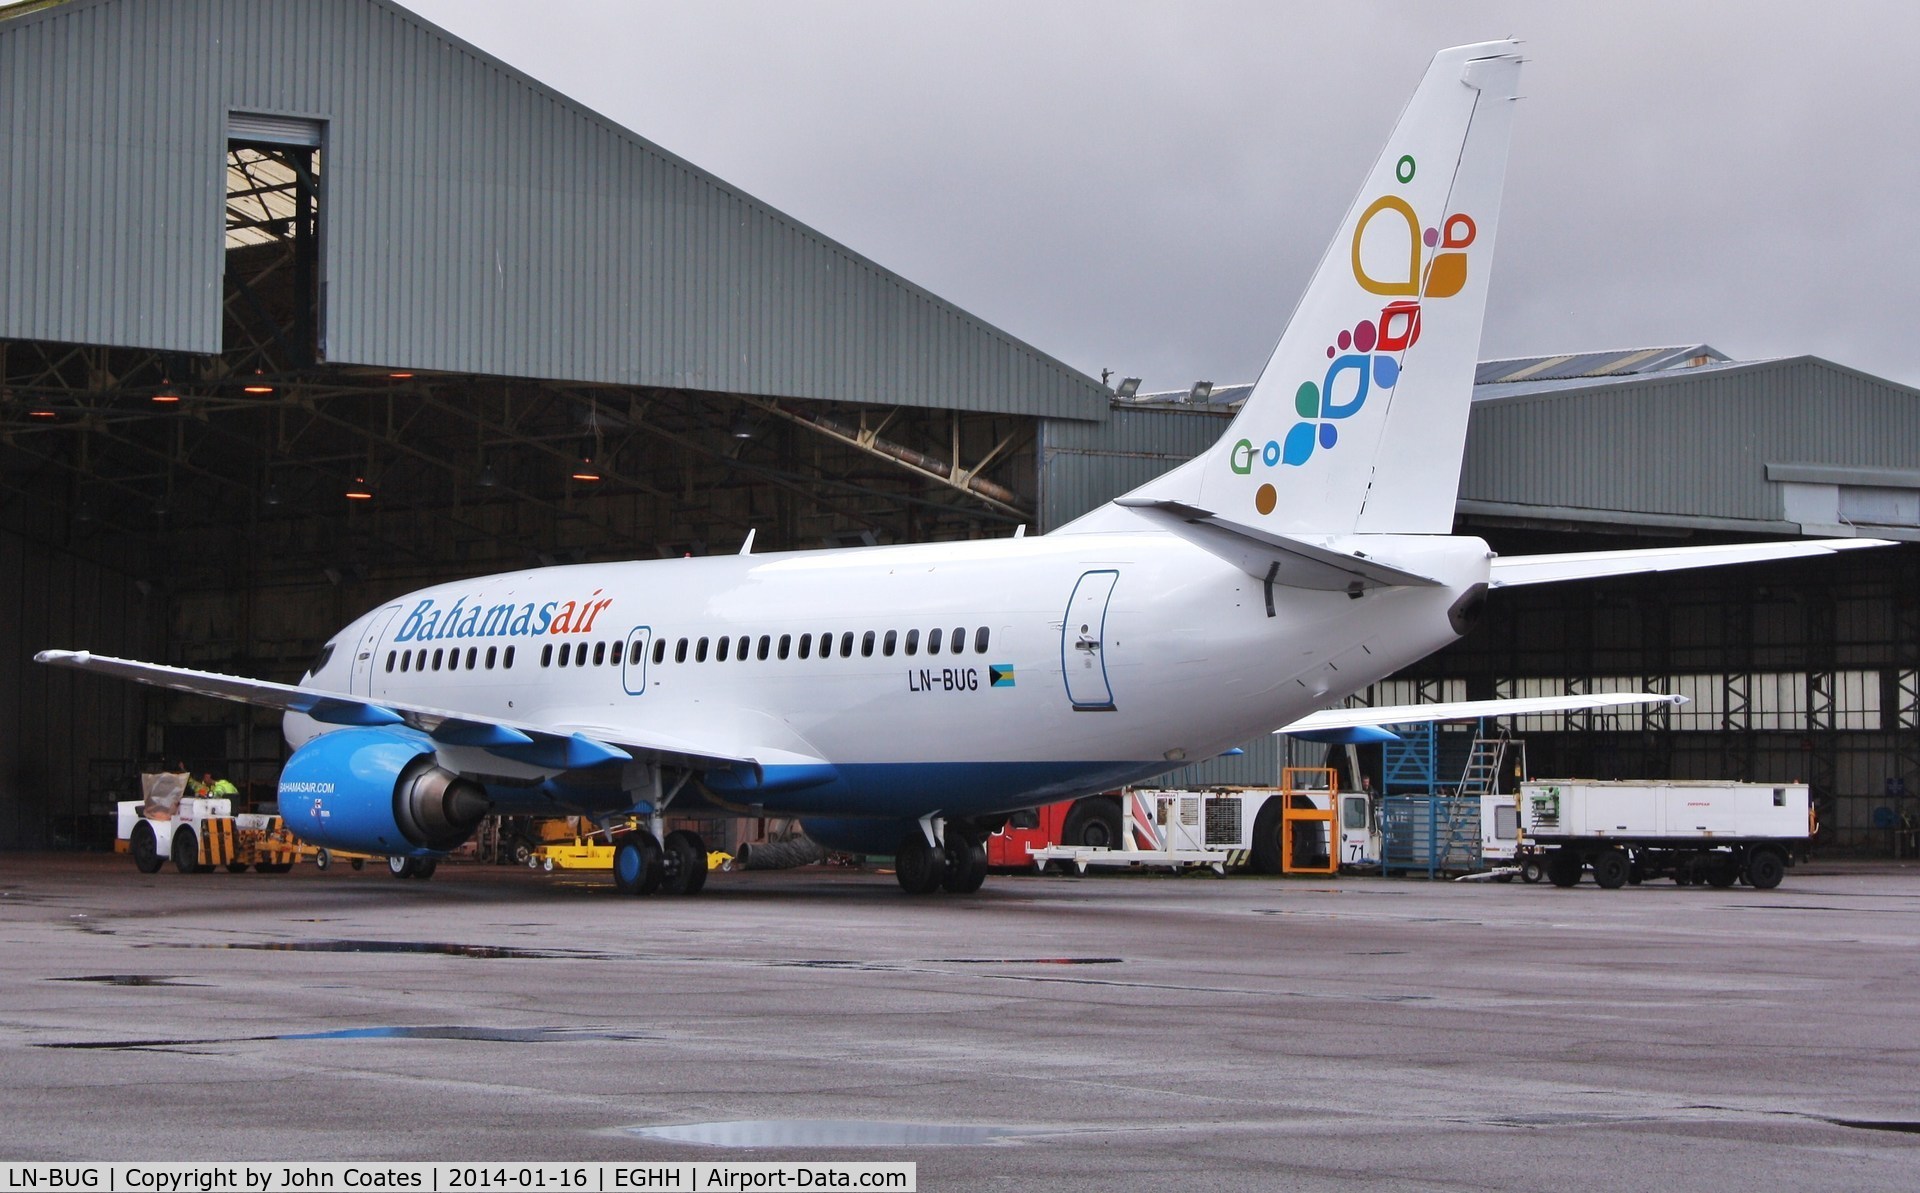 LN-BUG, 1997 Boeing 737-505 C/N 27631, Entering workshop after repaint and prior delivery via Oslo.